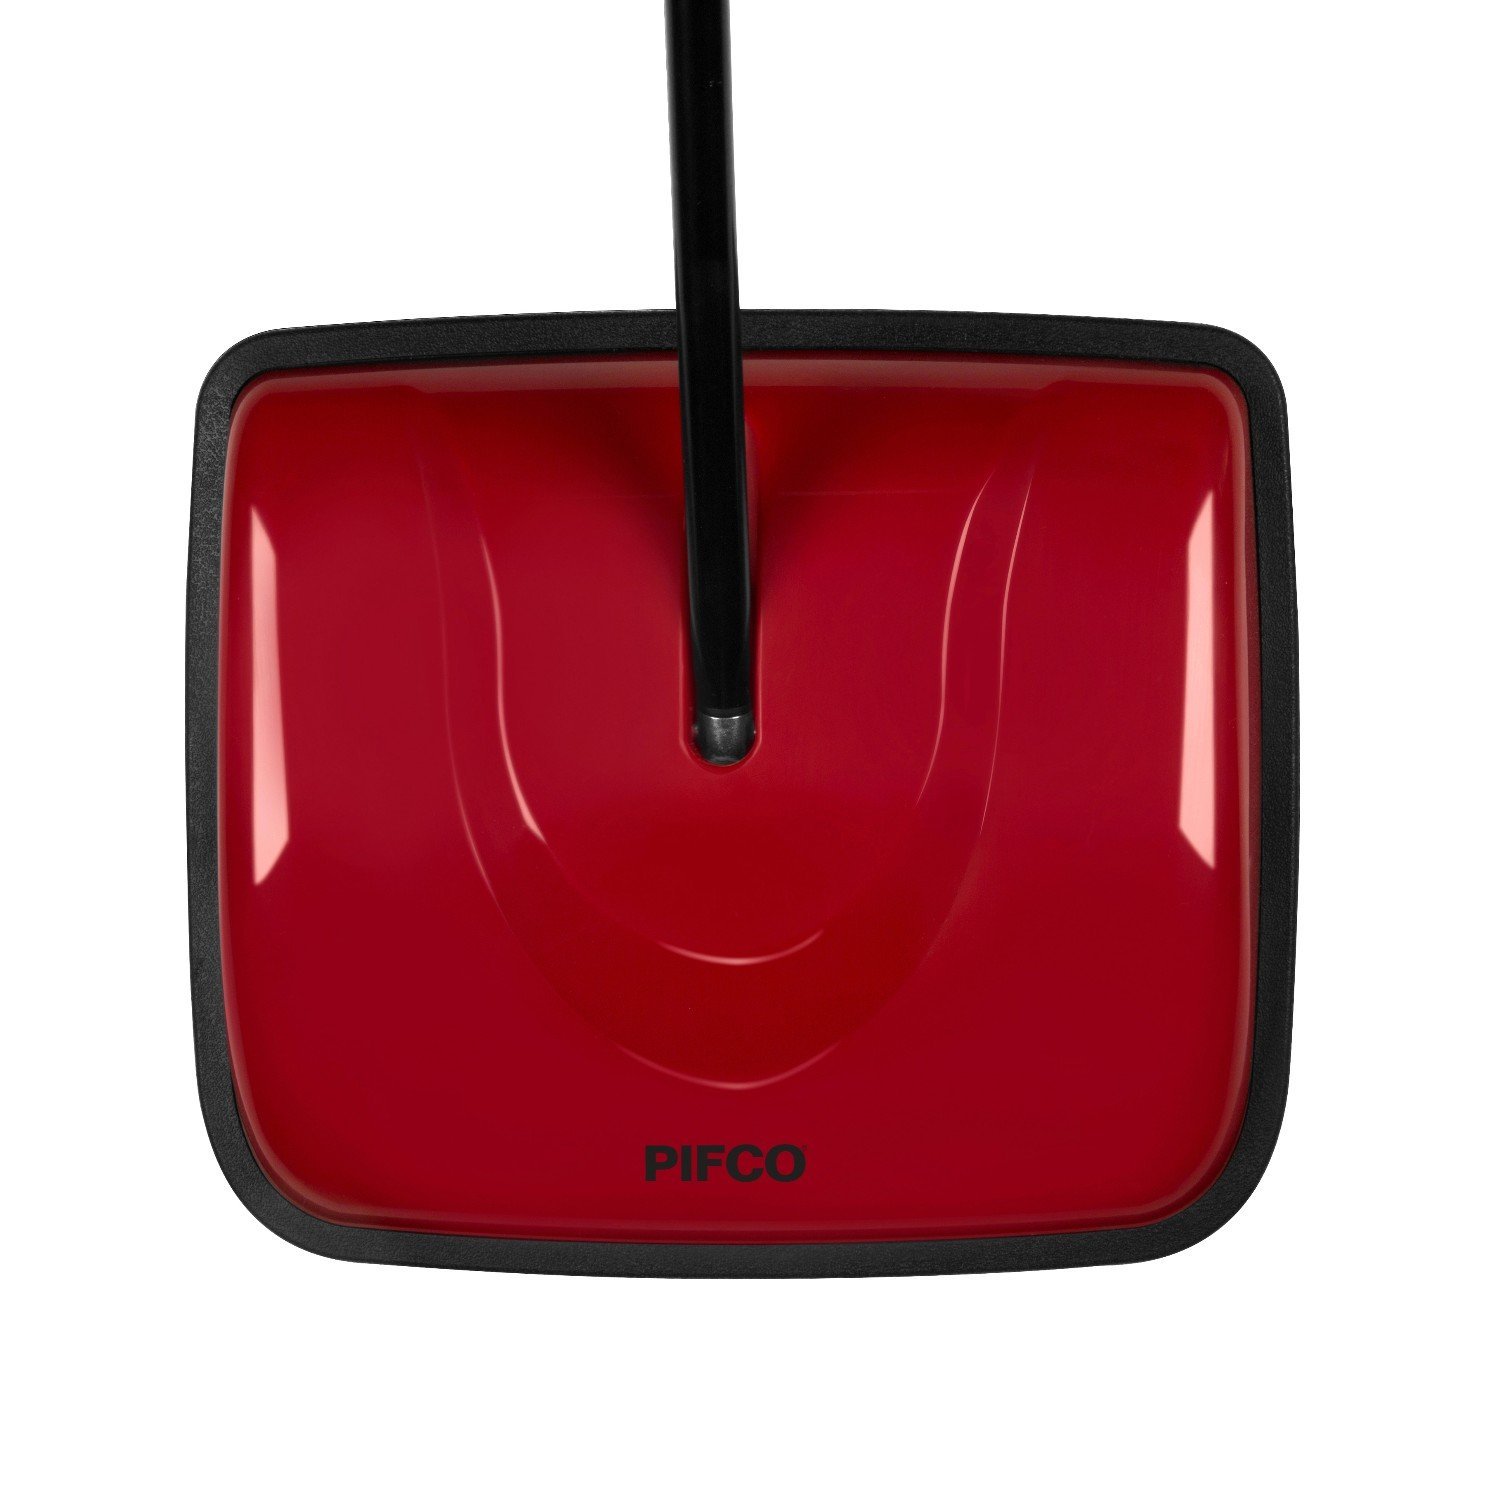 Pifco P28024 Floor Sweeper Red 